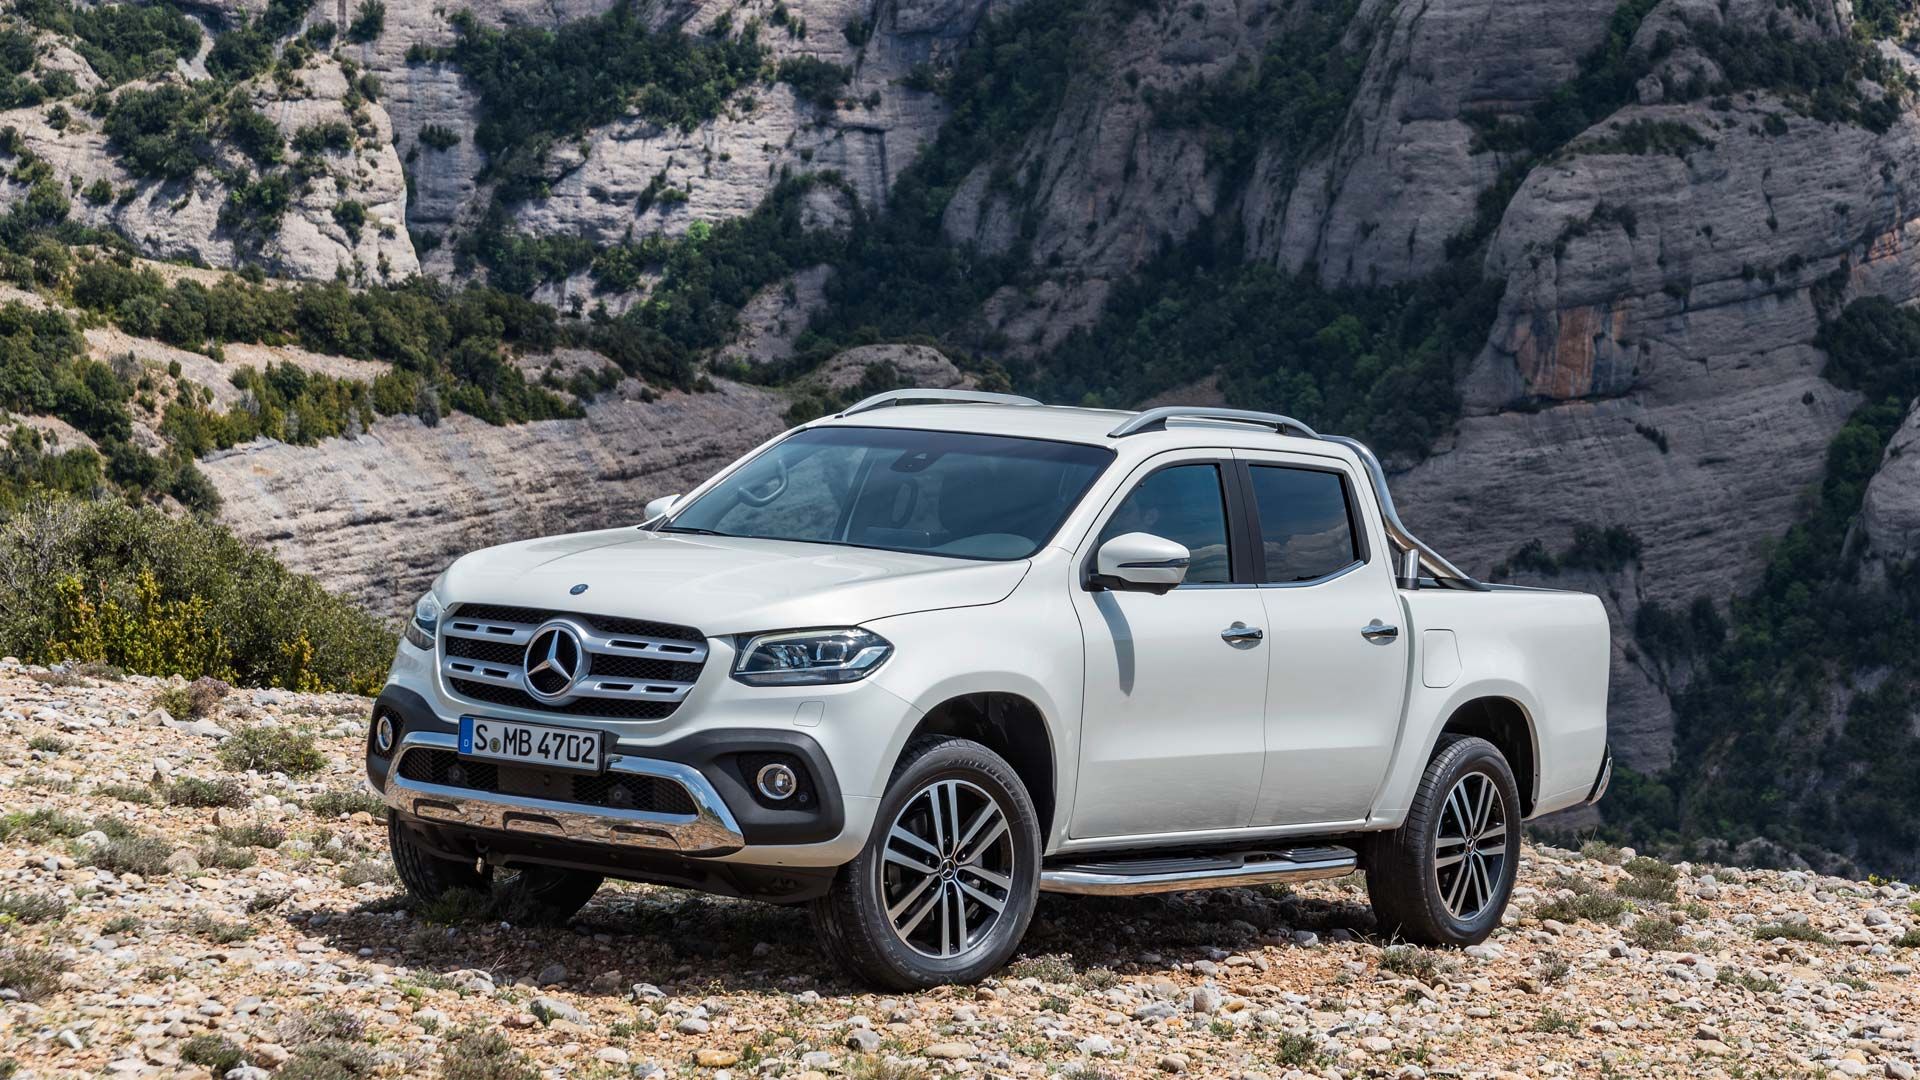 THe X Class was not available in the US